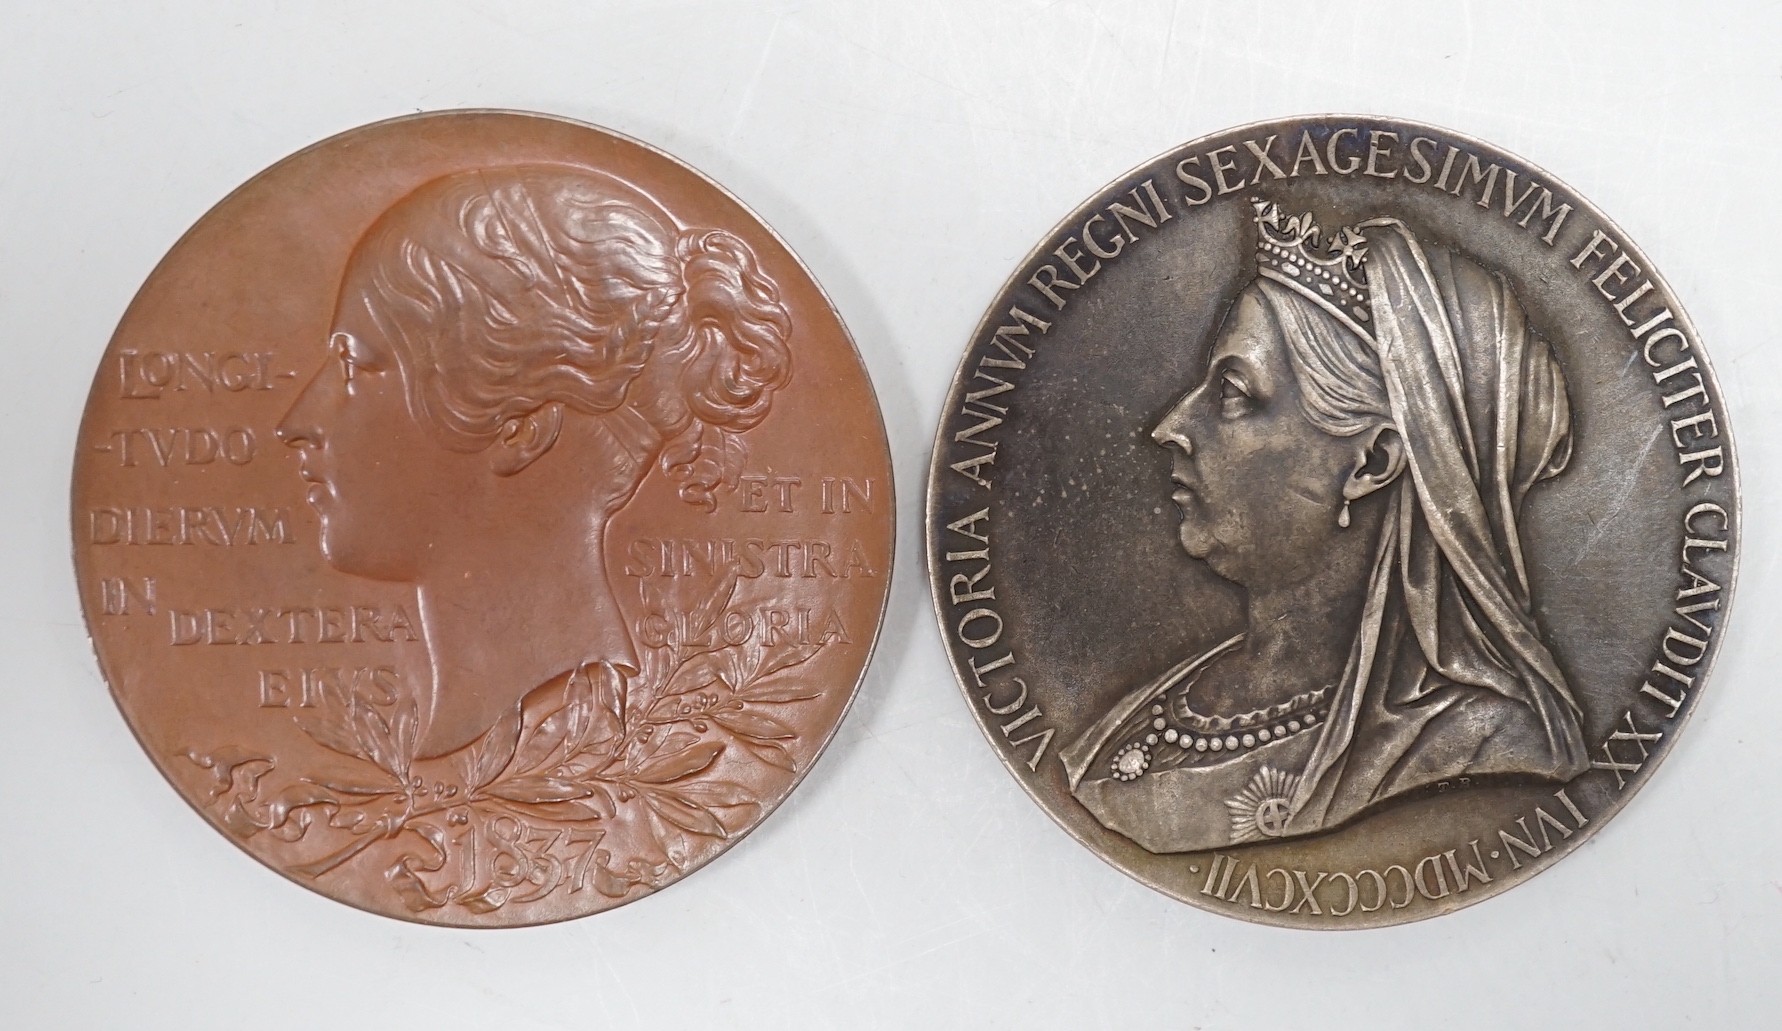 British commemorative medals: Queen Victoria Diamond Jubilee, two medals in silver and bronze (2)